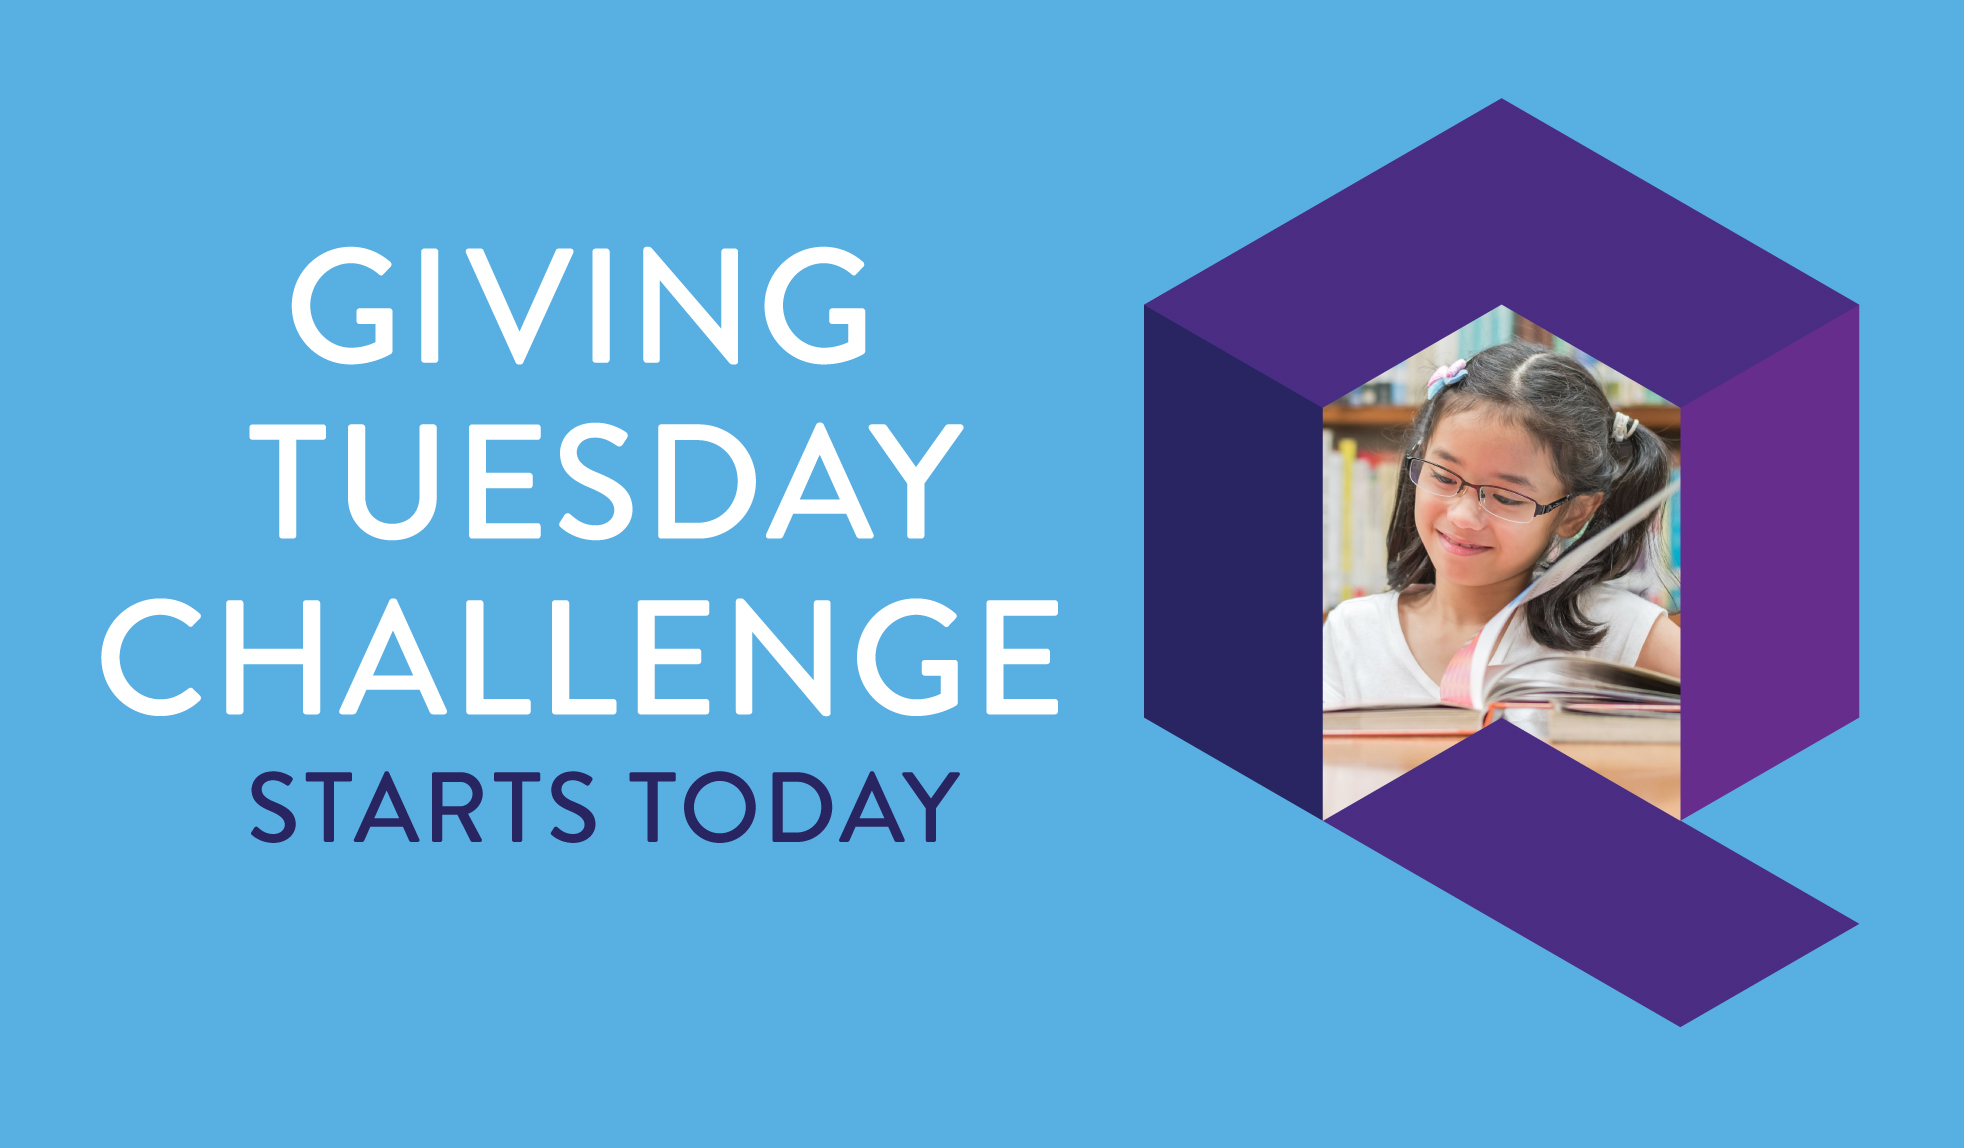 Be one of the first 150 people to donate and you’ll unlock $17,000 in matching funds for QPL.